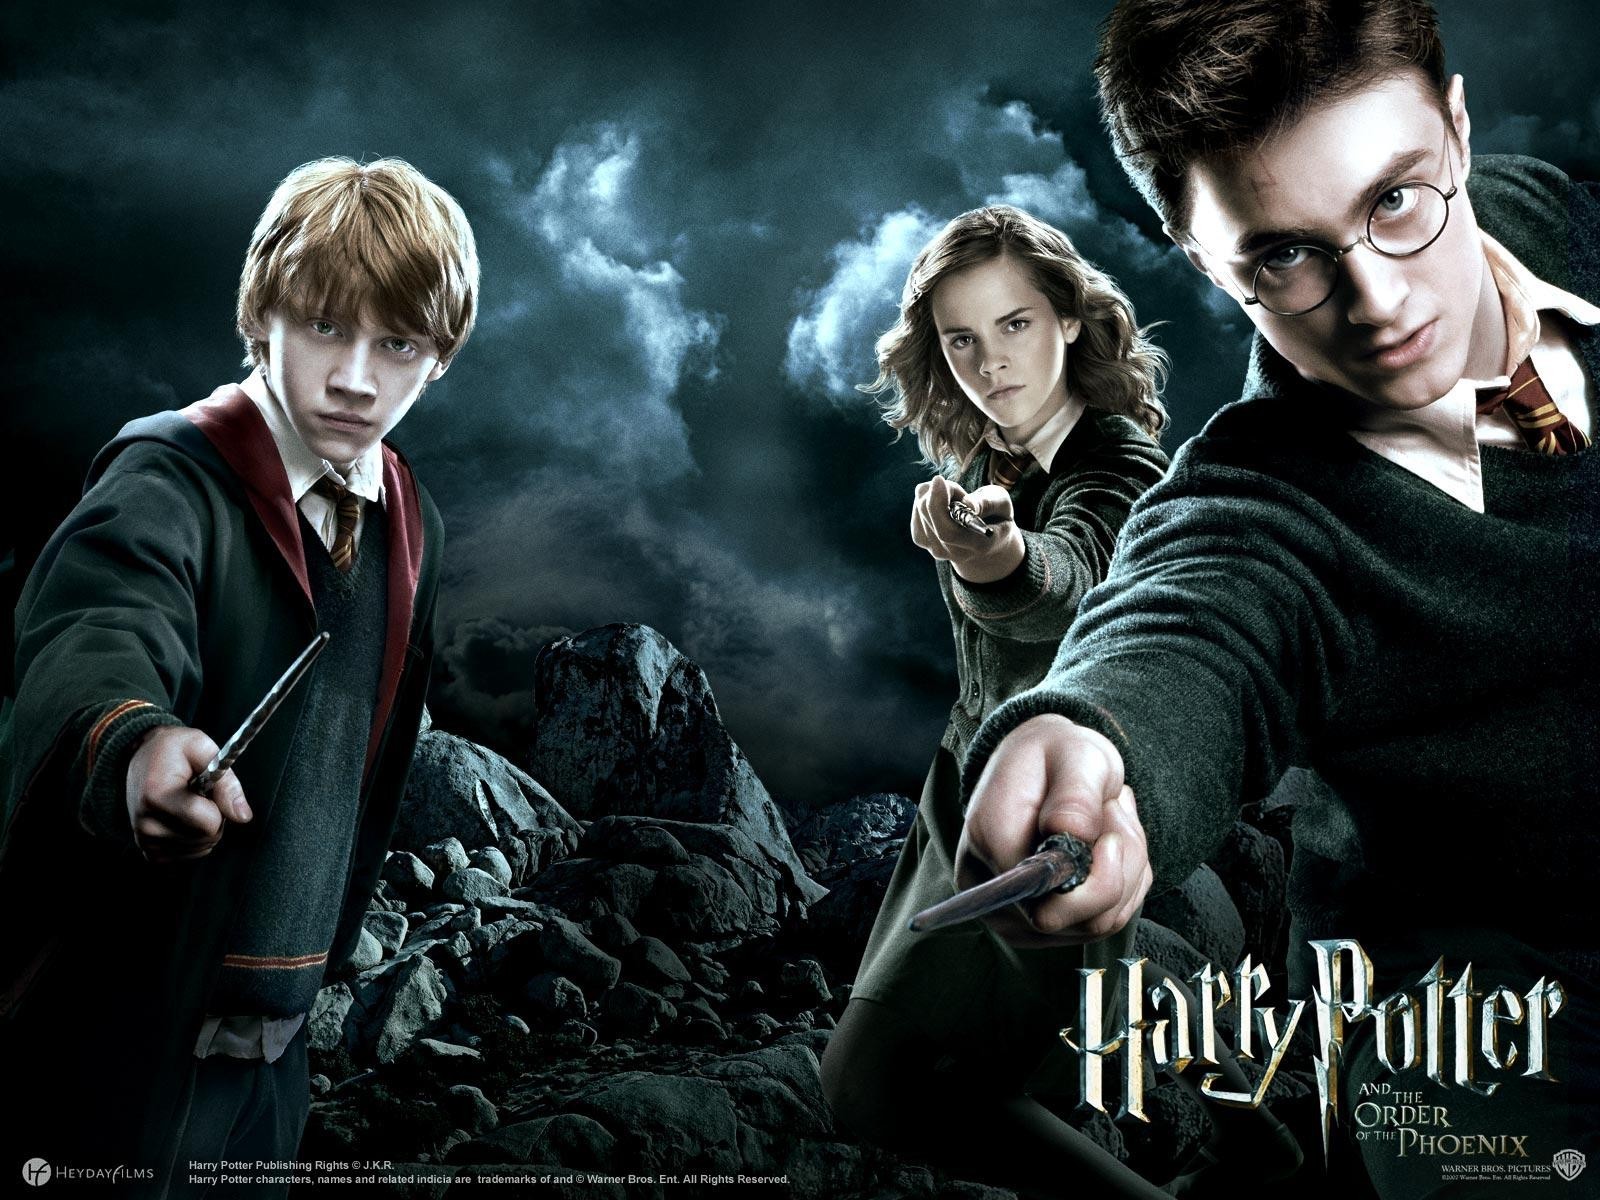 Harry Potter And The Deathly Hallows - Part 2 In Hindi Dubbed Movie Download conros Harry+Potter+and+the+Deathly+Hallows%252C+Part+2+2011+hollywood+movie+watch+online